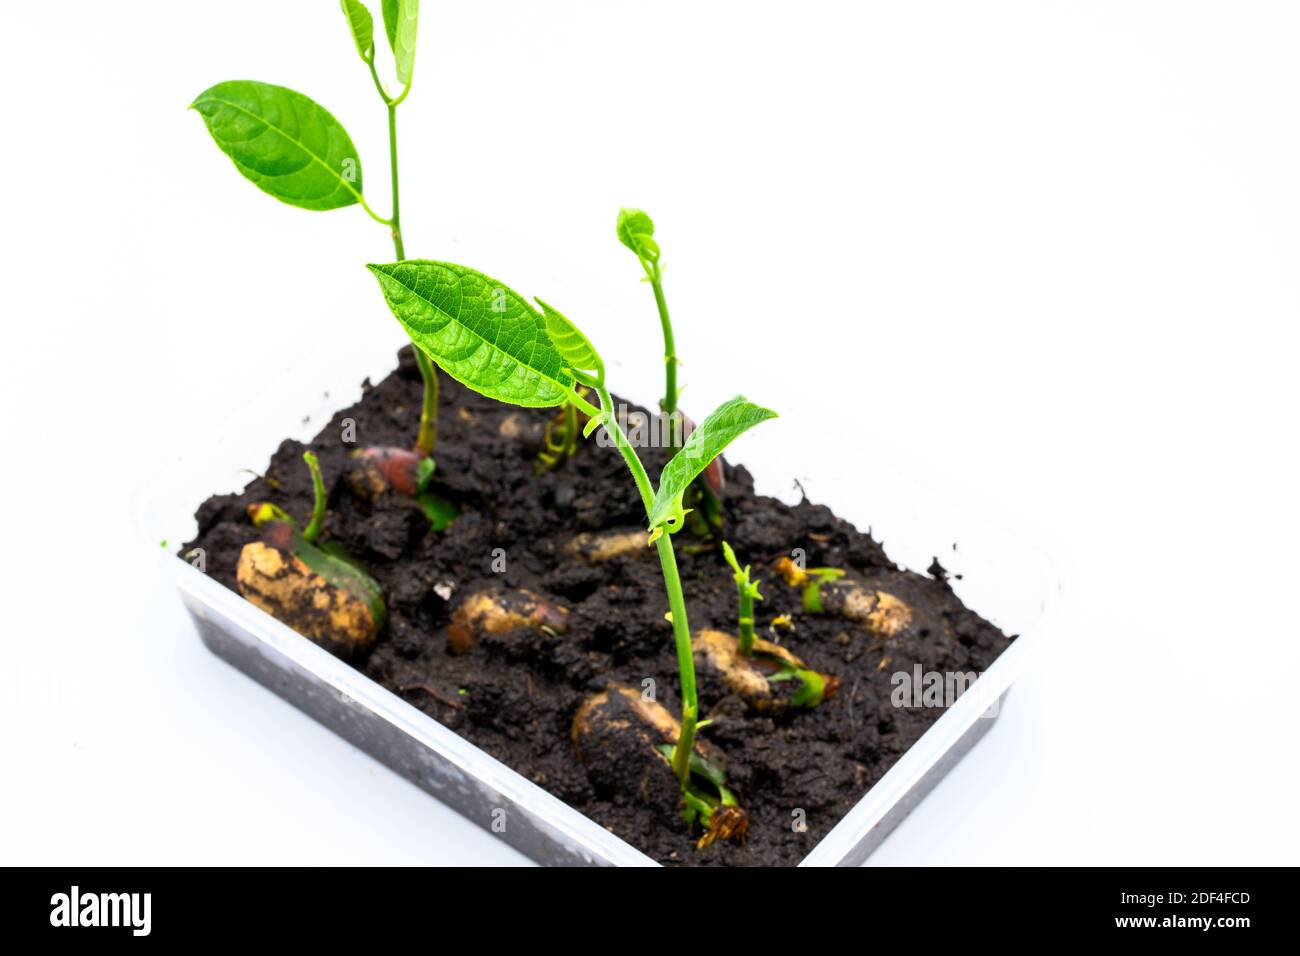 Green seedling in plastic box, fruit seed growing up photo. Growing plant from seed concept. Slow and steady development. Fresh green saplings in blac Stock Photo